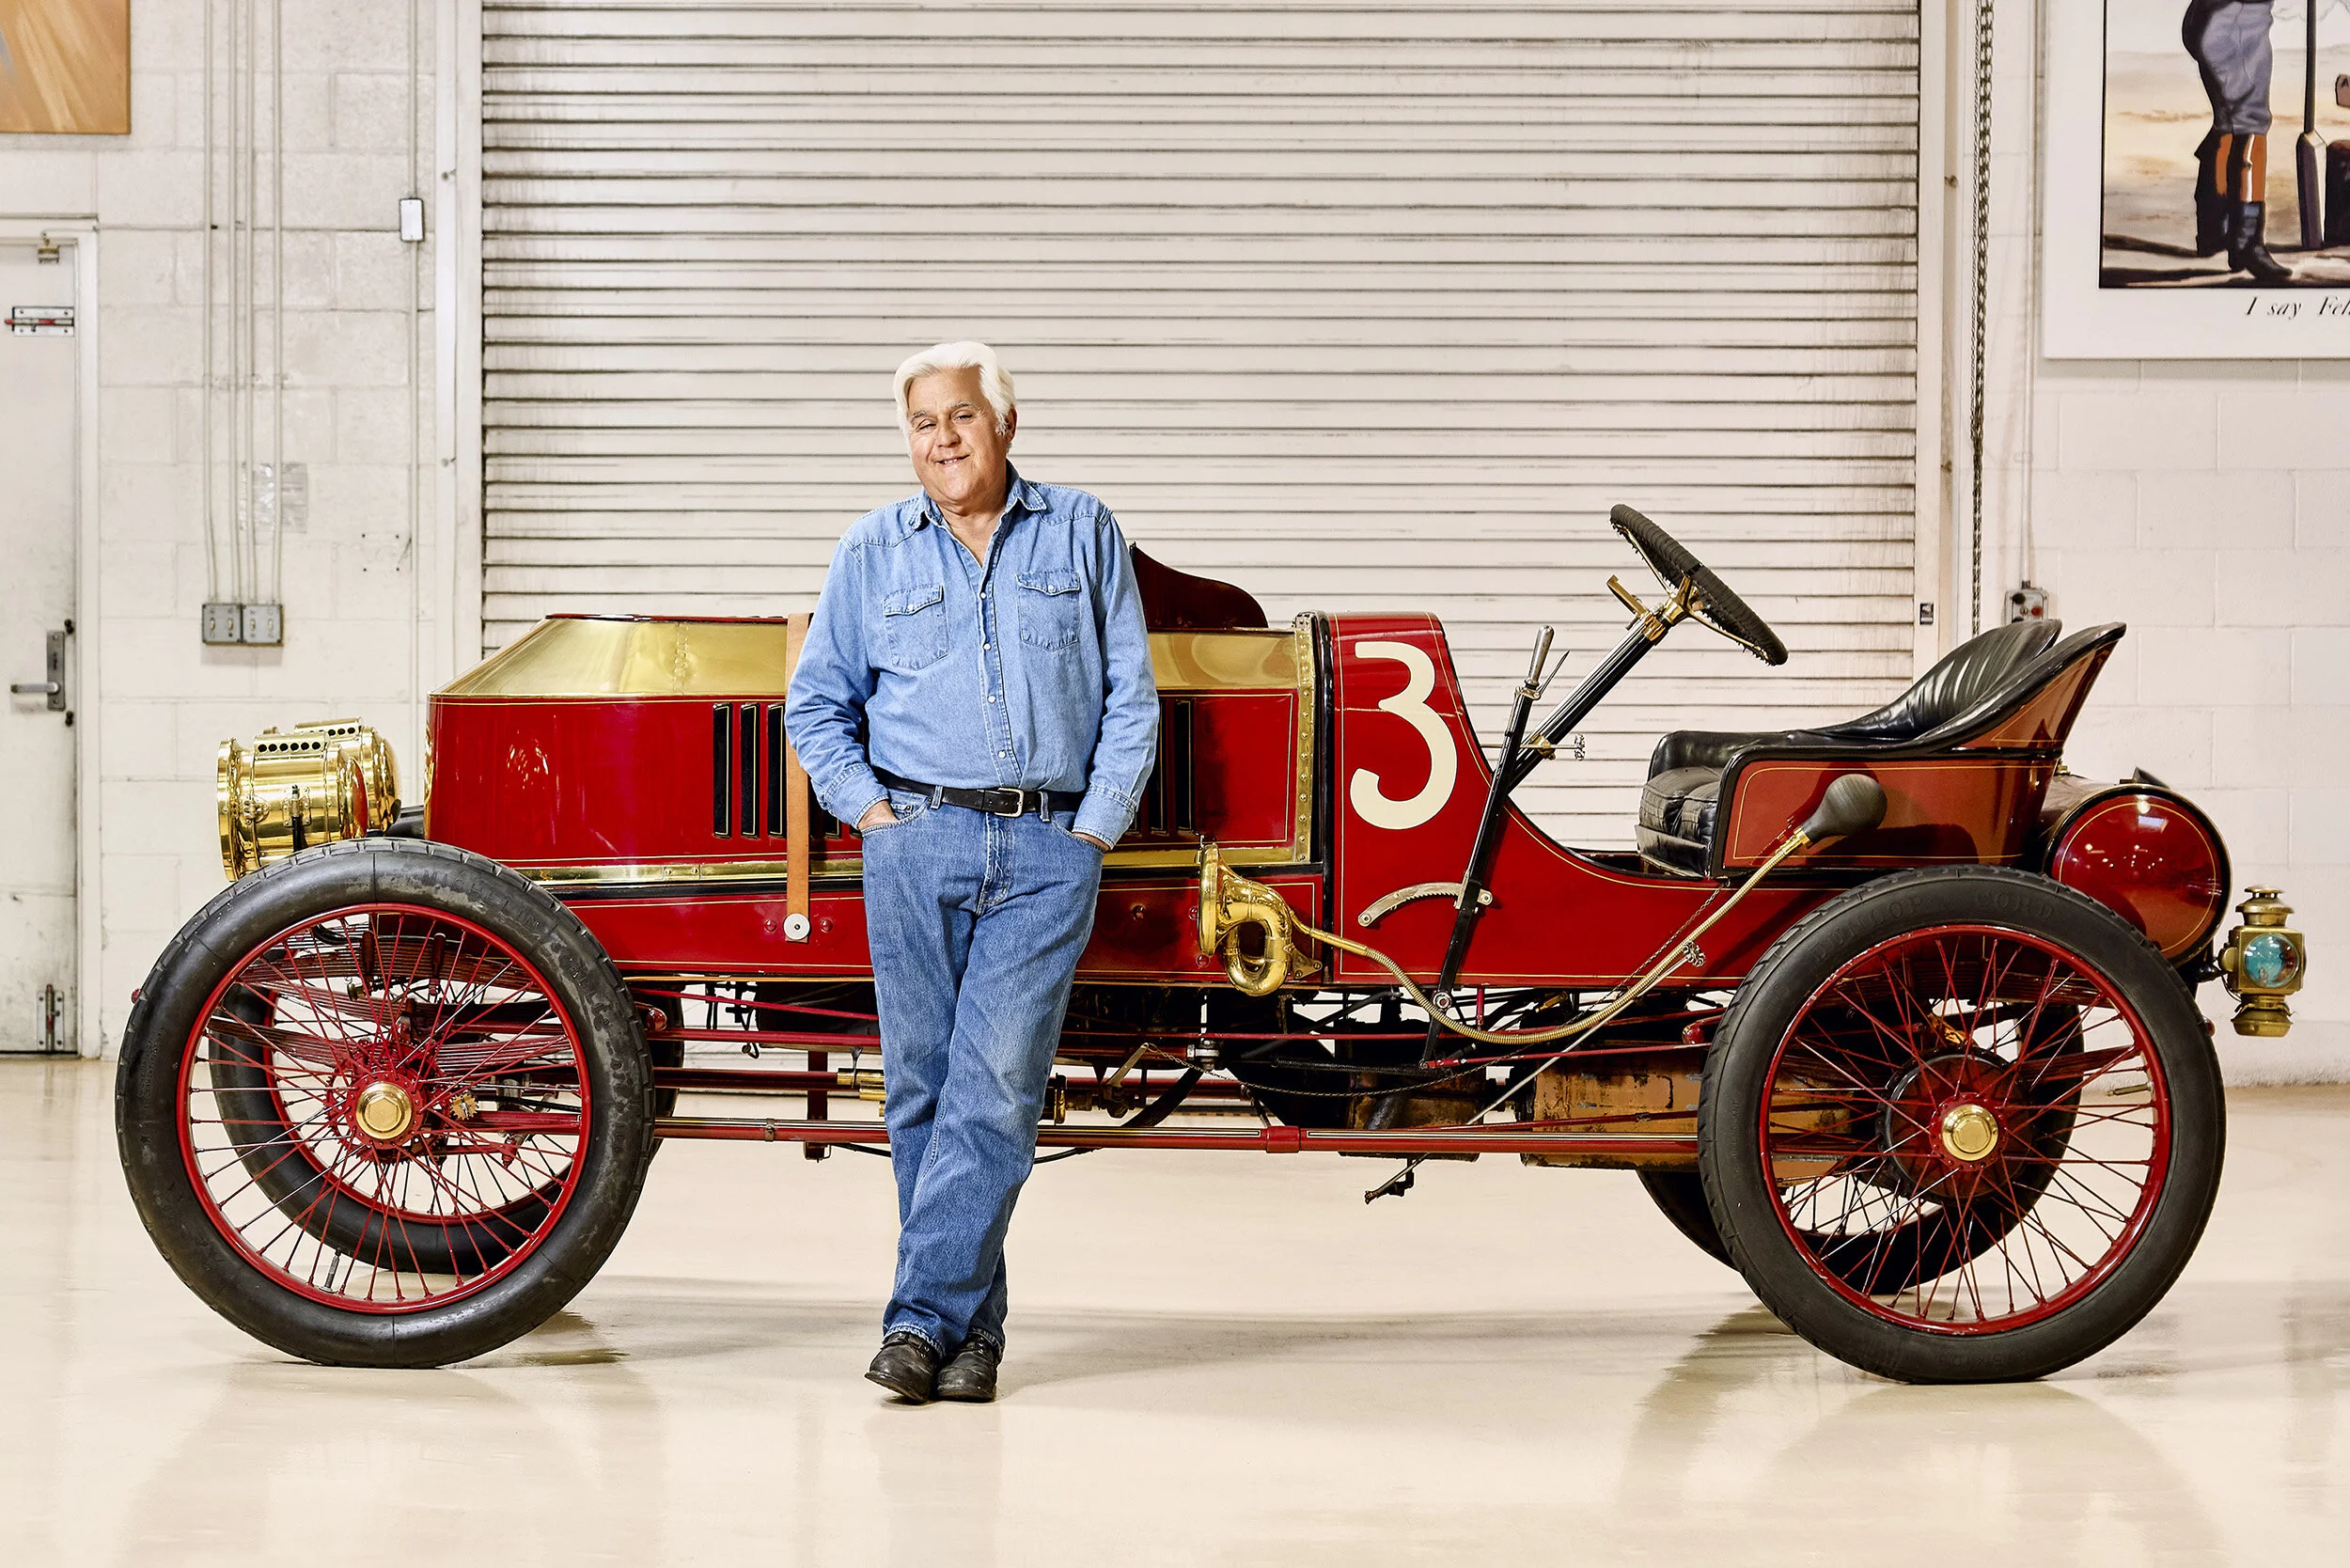 Business F1 Top 20 Petrolheads: Jay Leno, King of Late Night Laughter